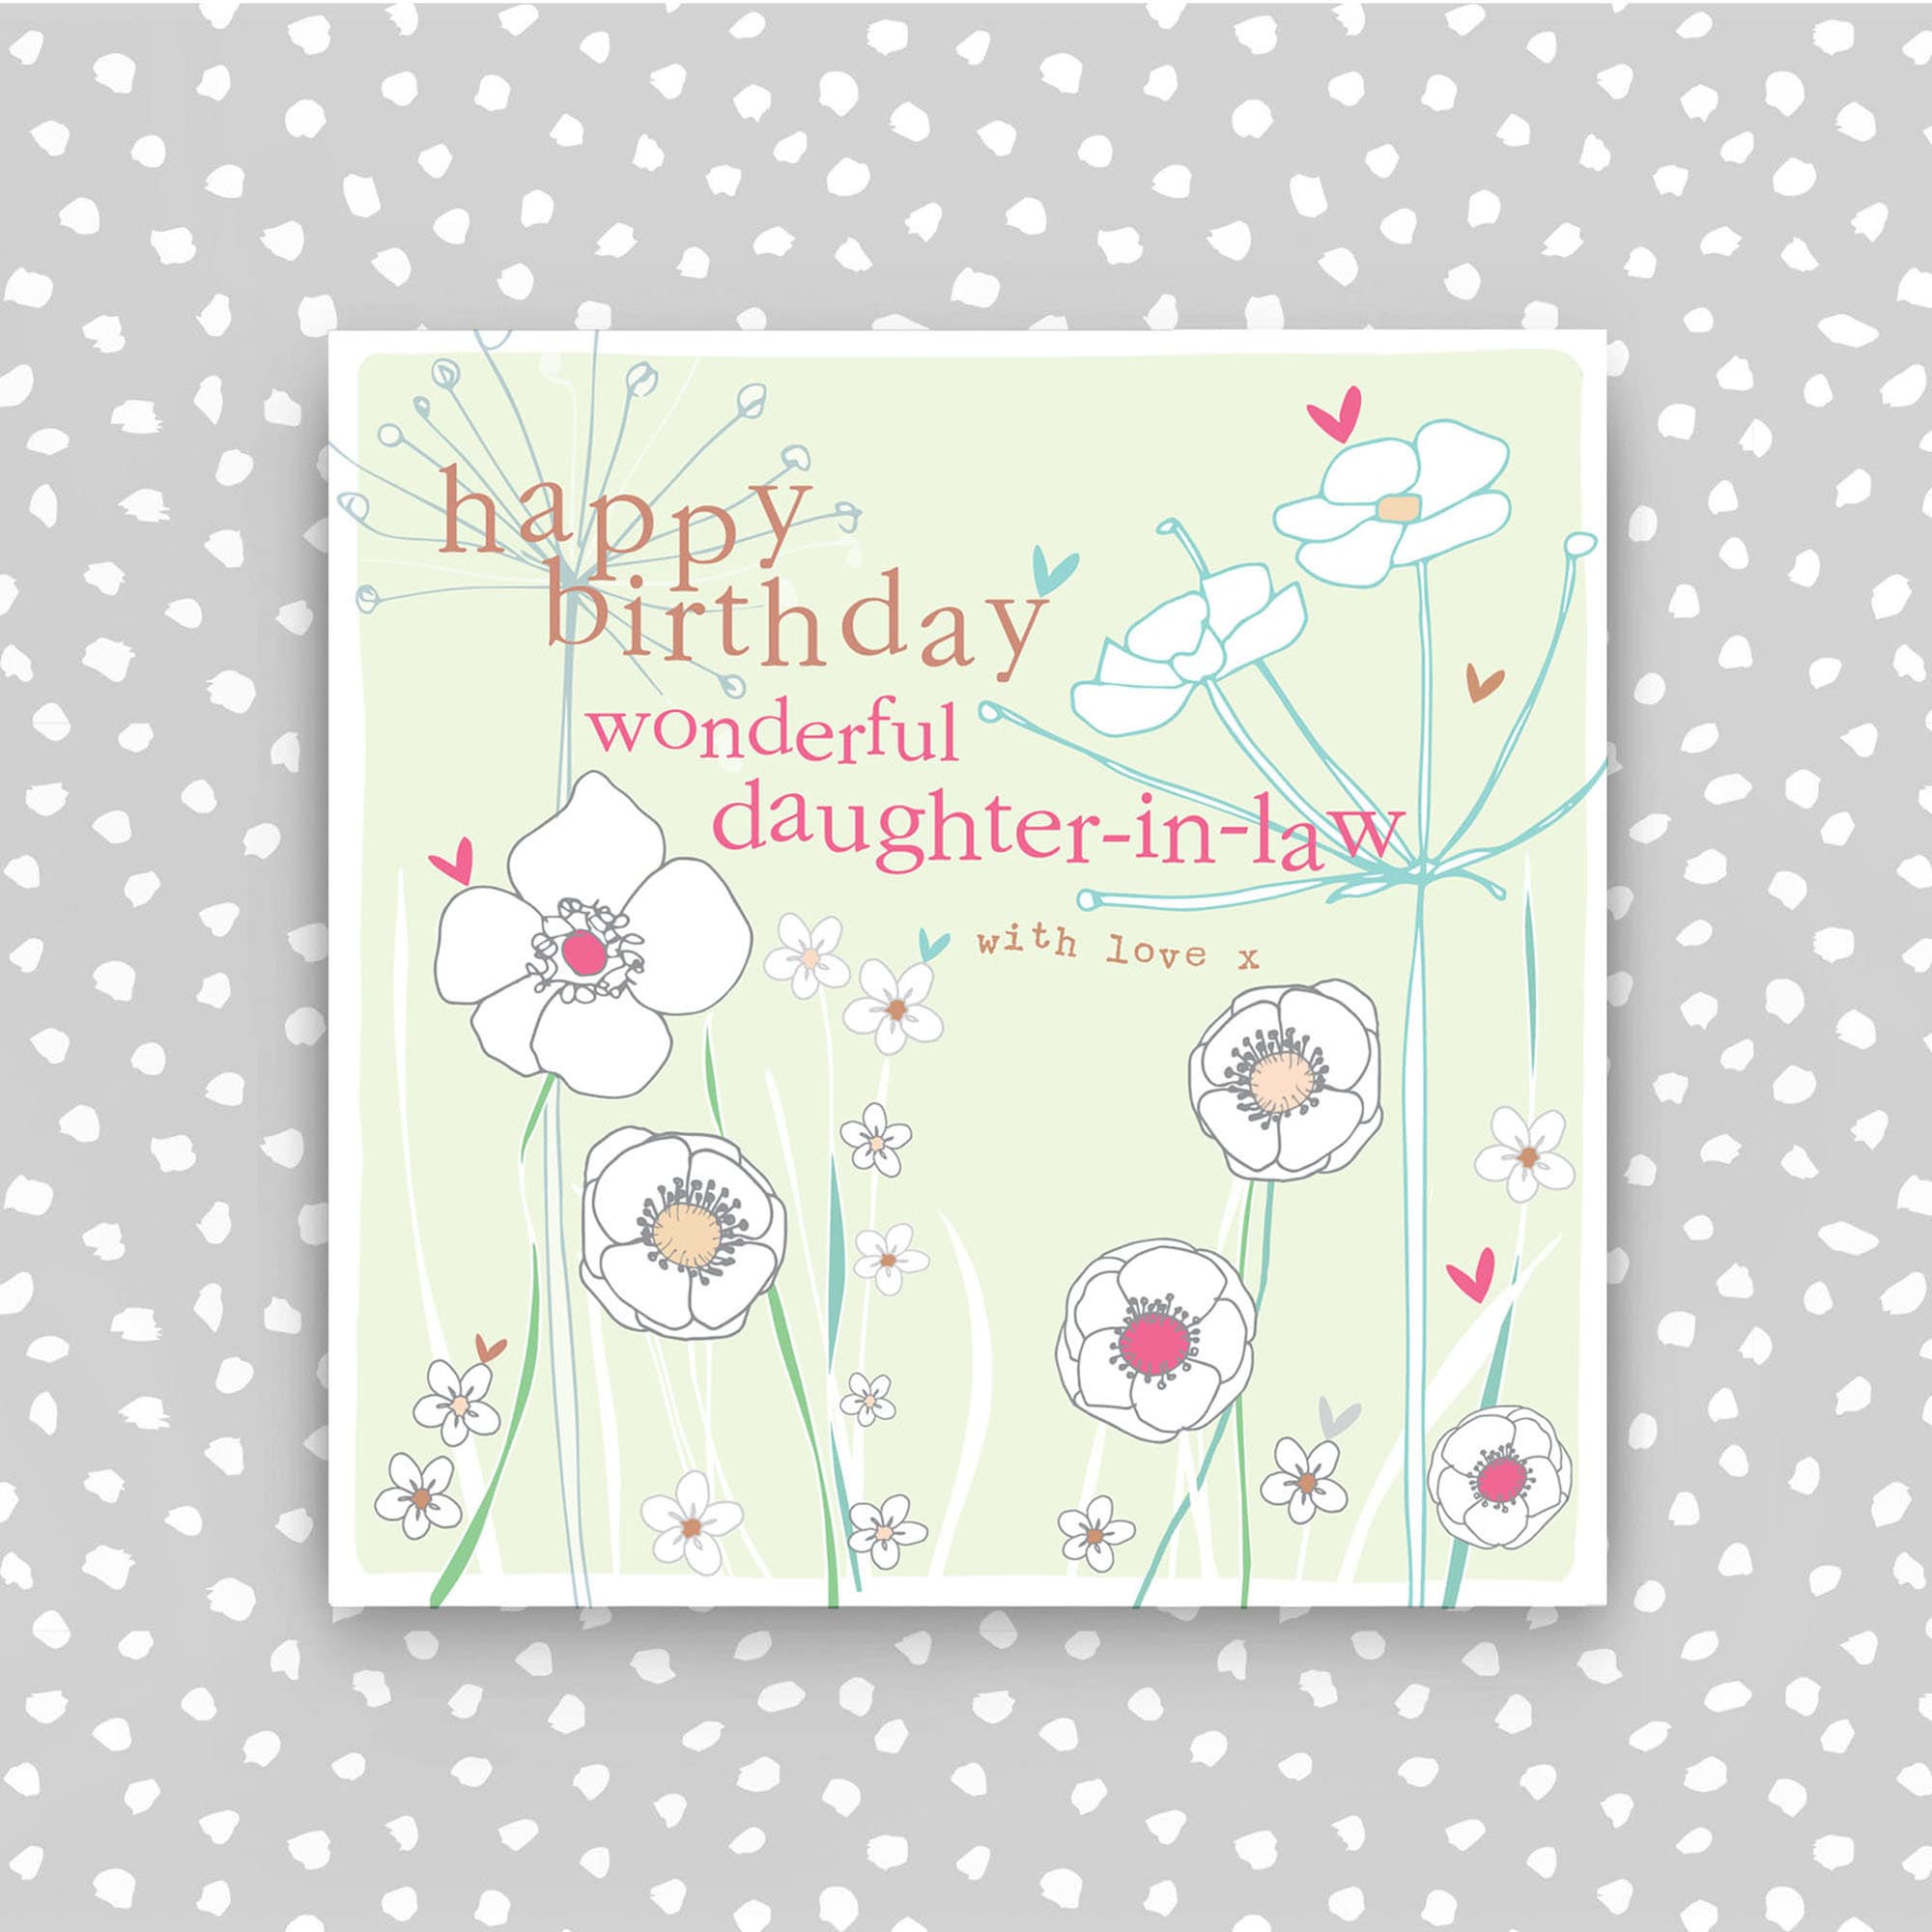 Daughter In Law Birthday Card Birthday Card For Daughter In Etsy